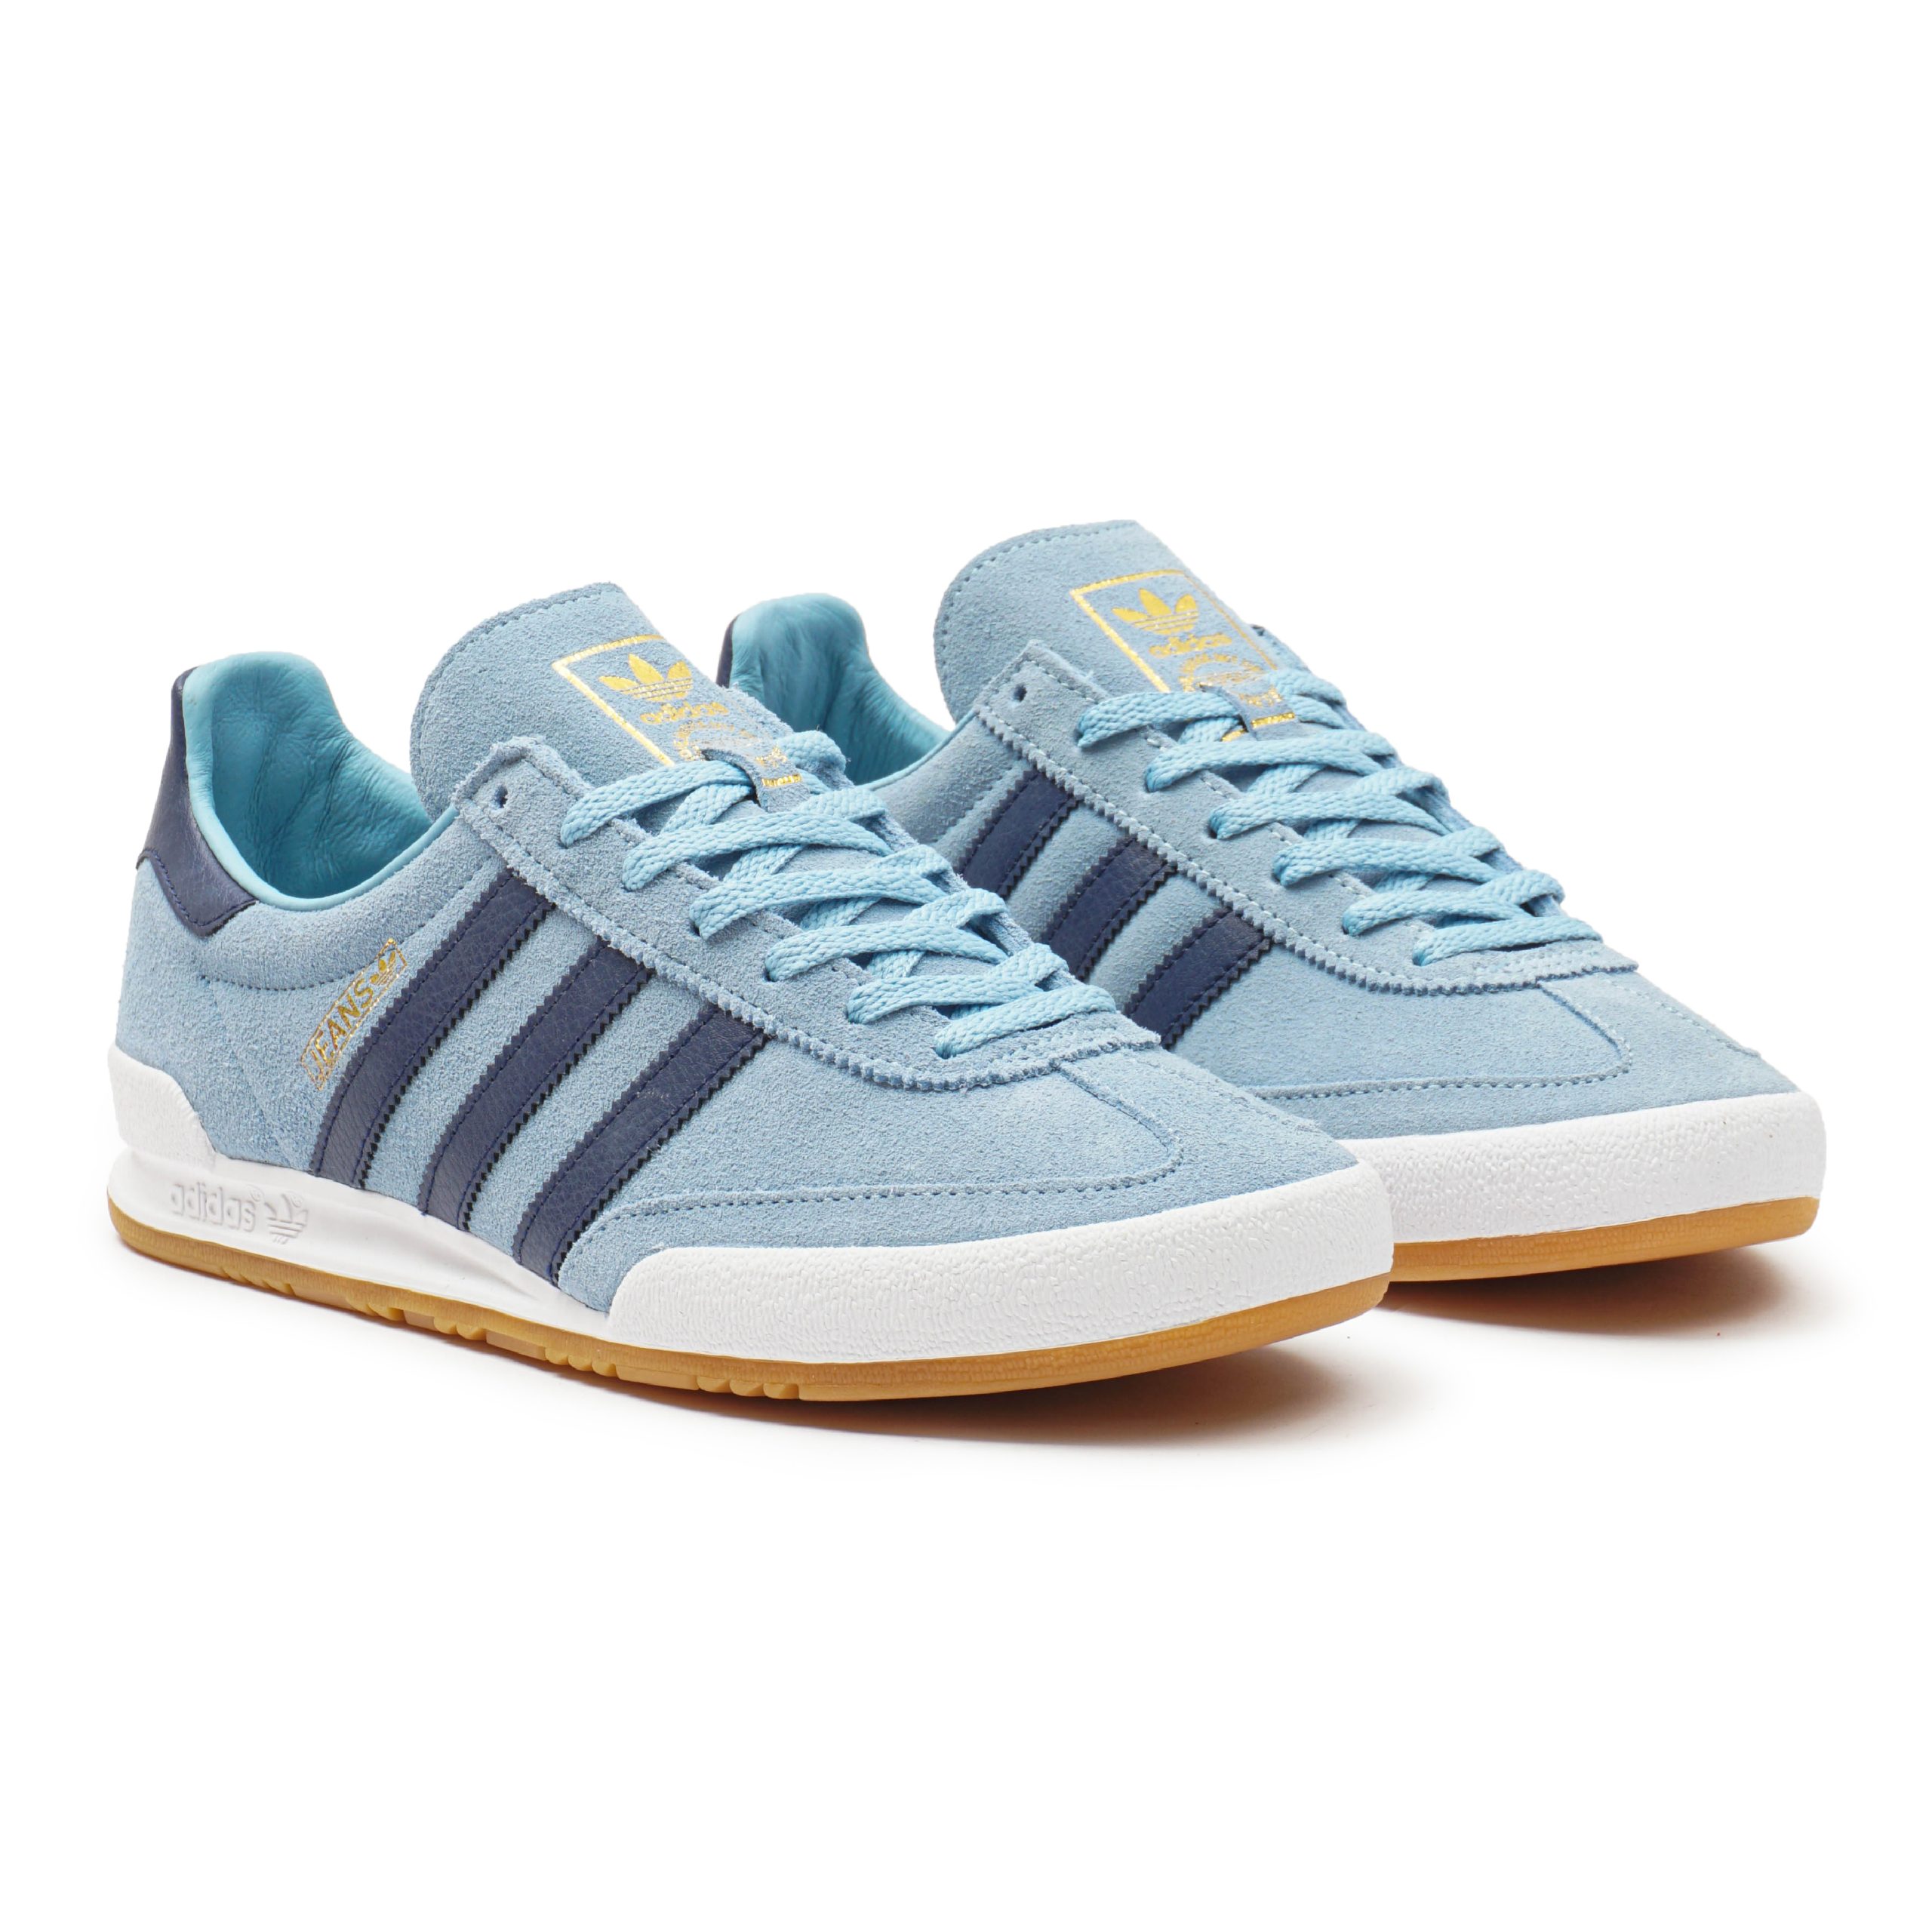 Adidas Jeans Trainers Chalk White/Legend Ink - 80s Casual Classics